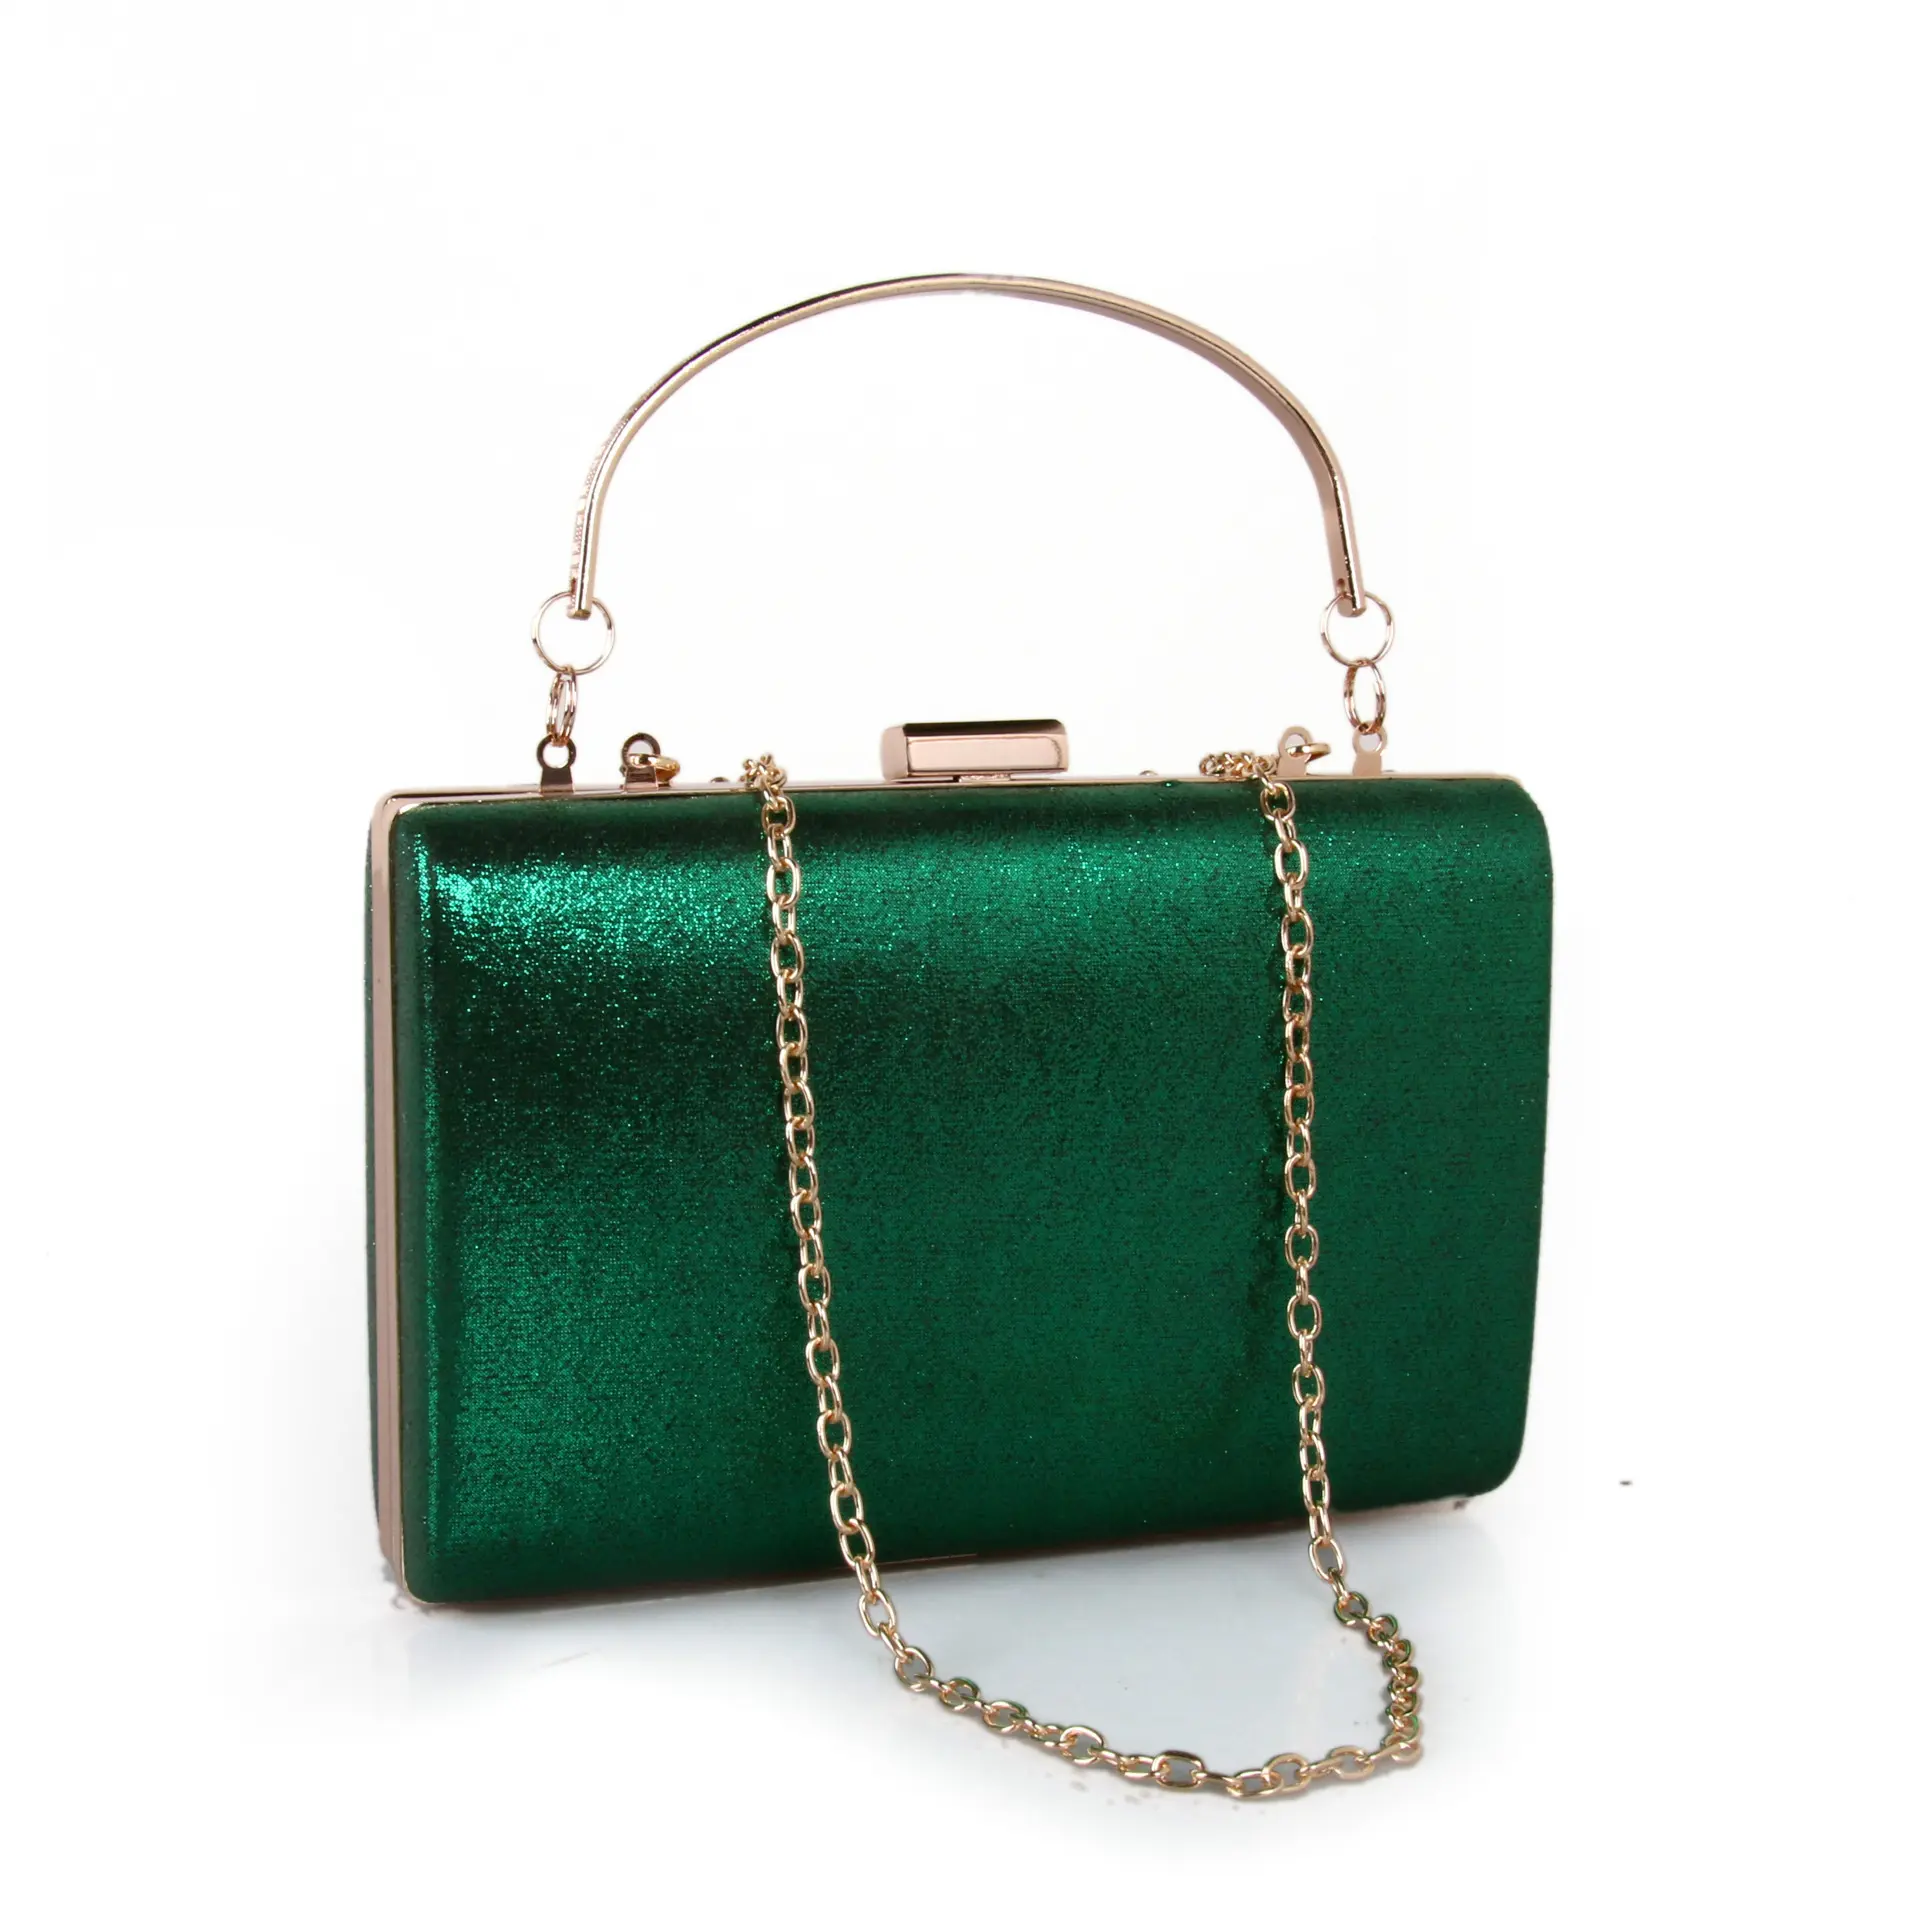 Finley “Cocktail Party” Clutch in Emerald Green Leather - Jeffrey Levinson